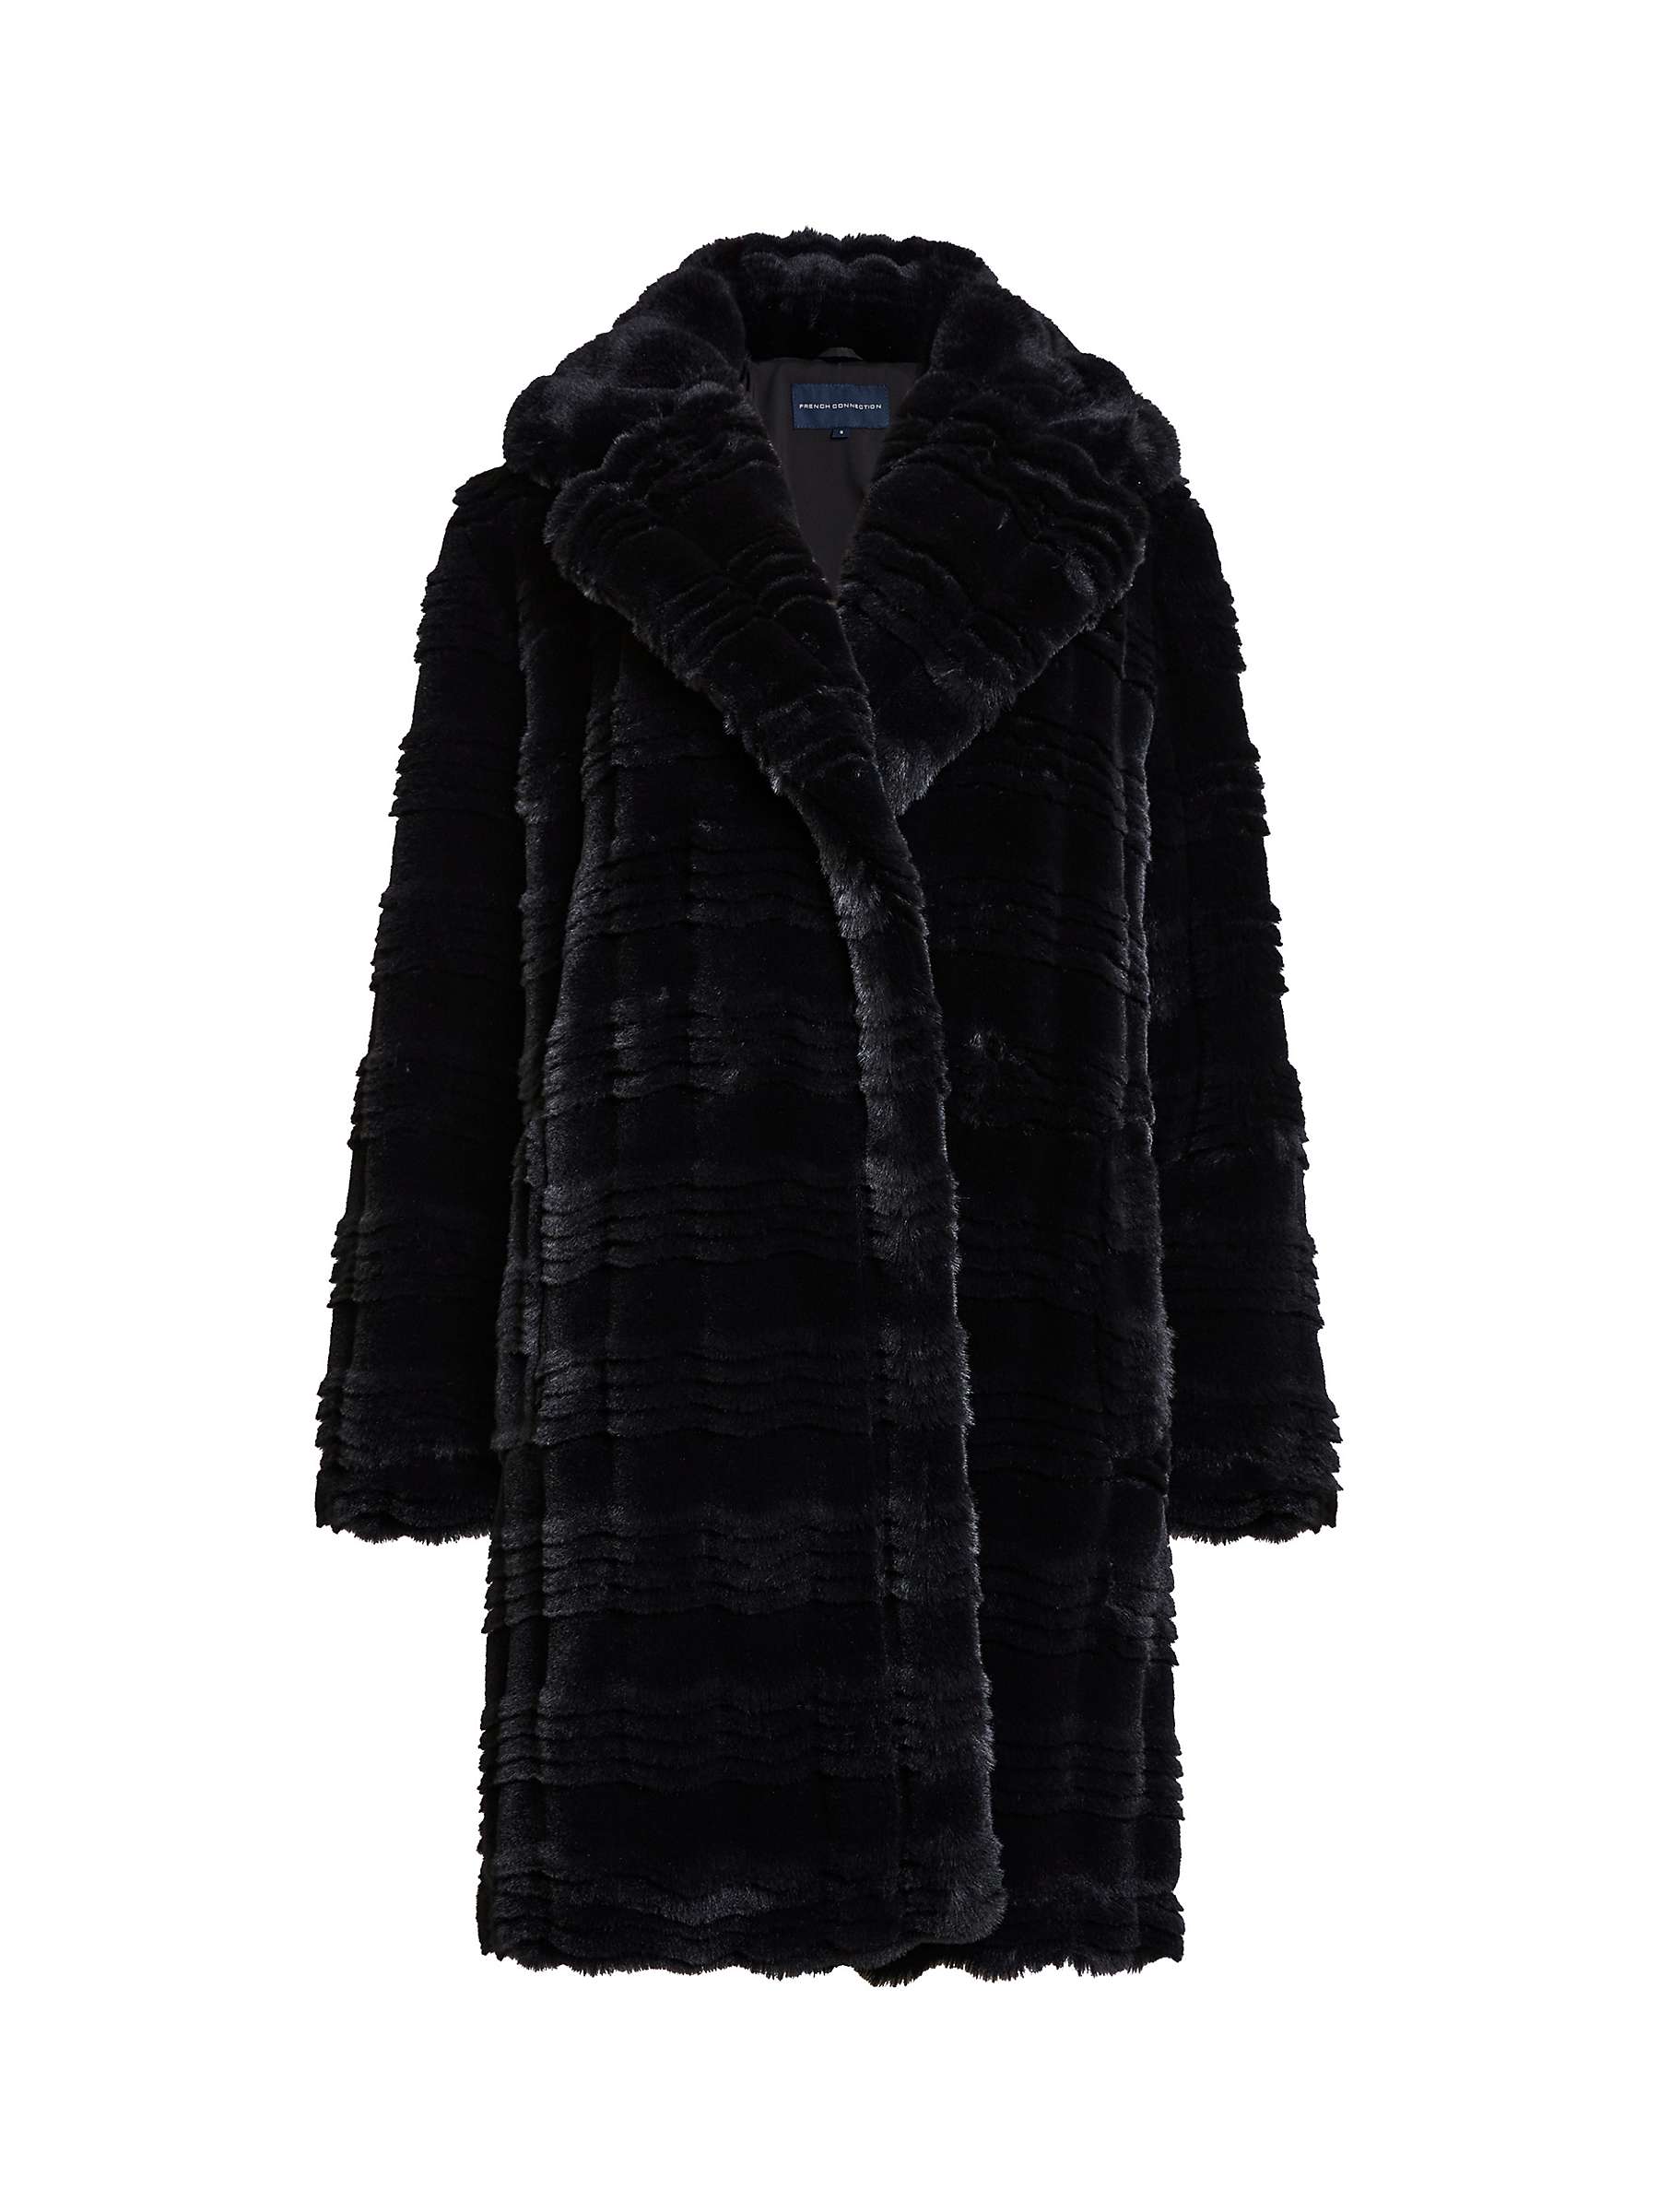 Buy French Connection Daryn Faux Fur Coat, Blackout Online at johnlewis.com